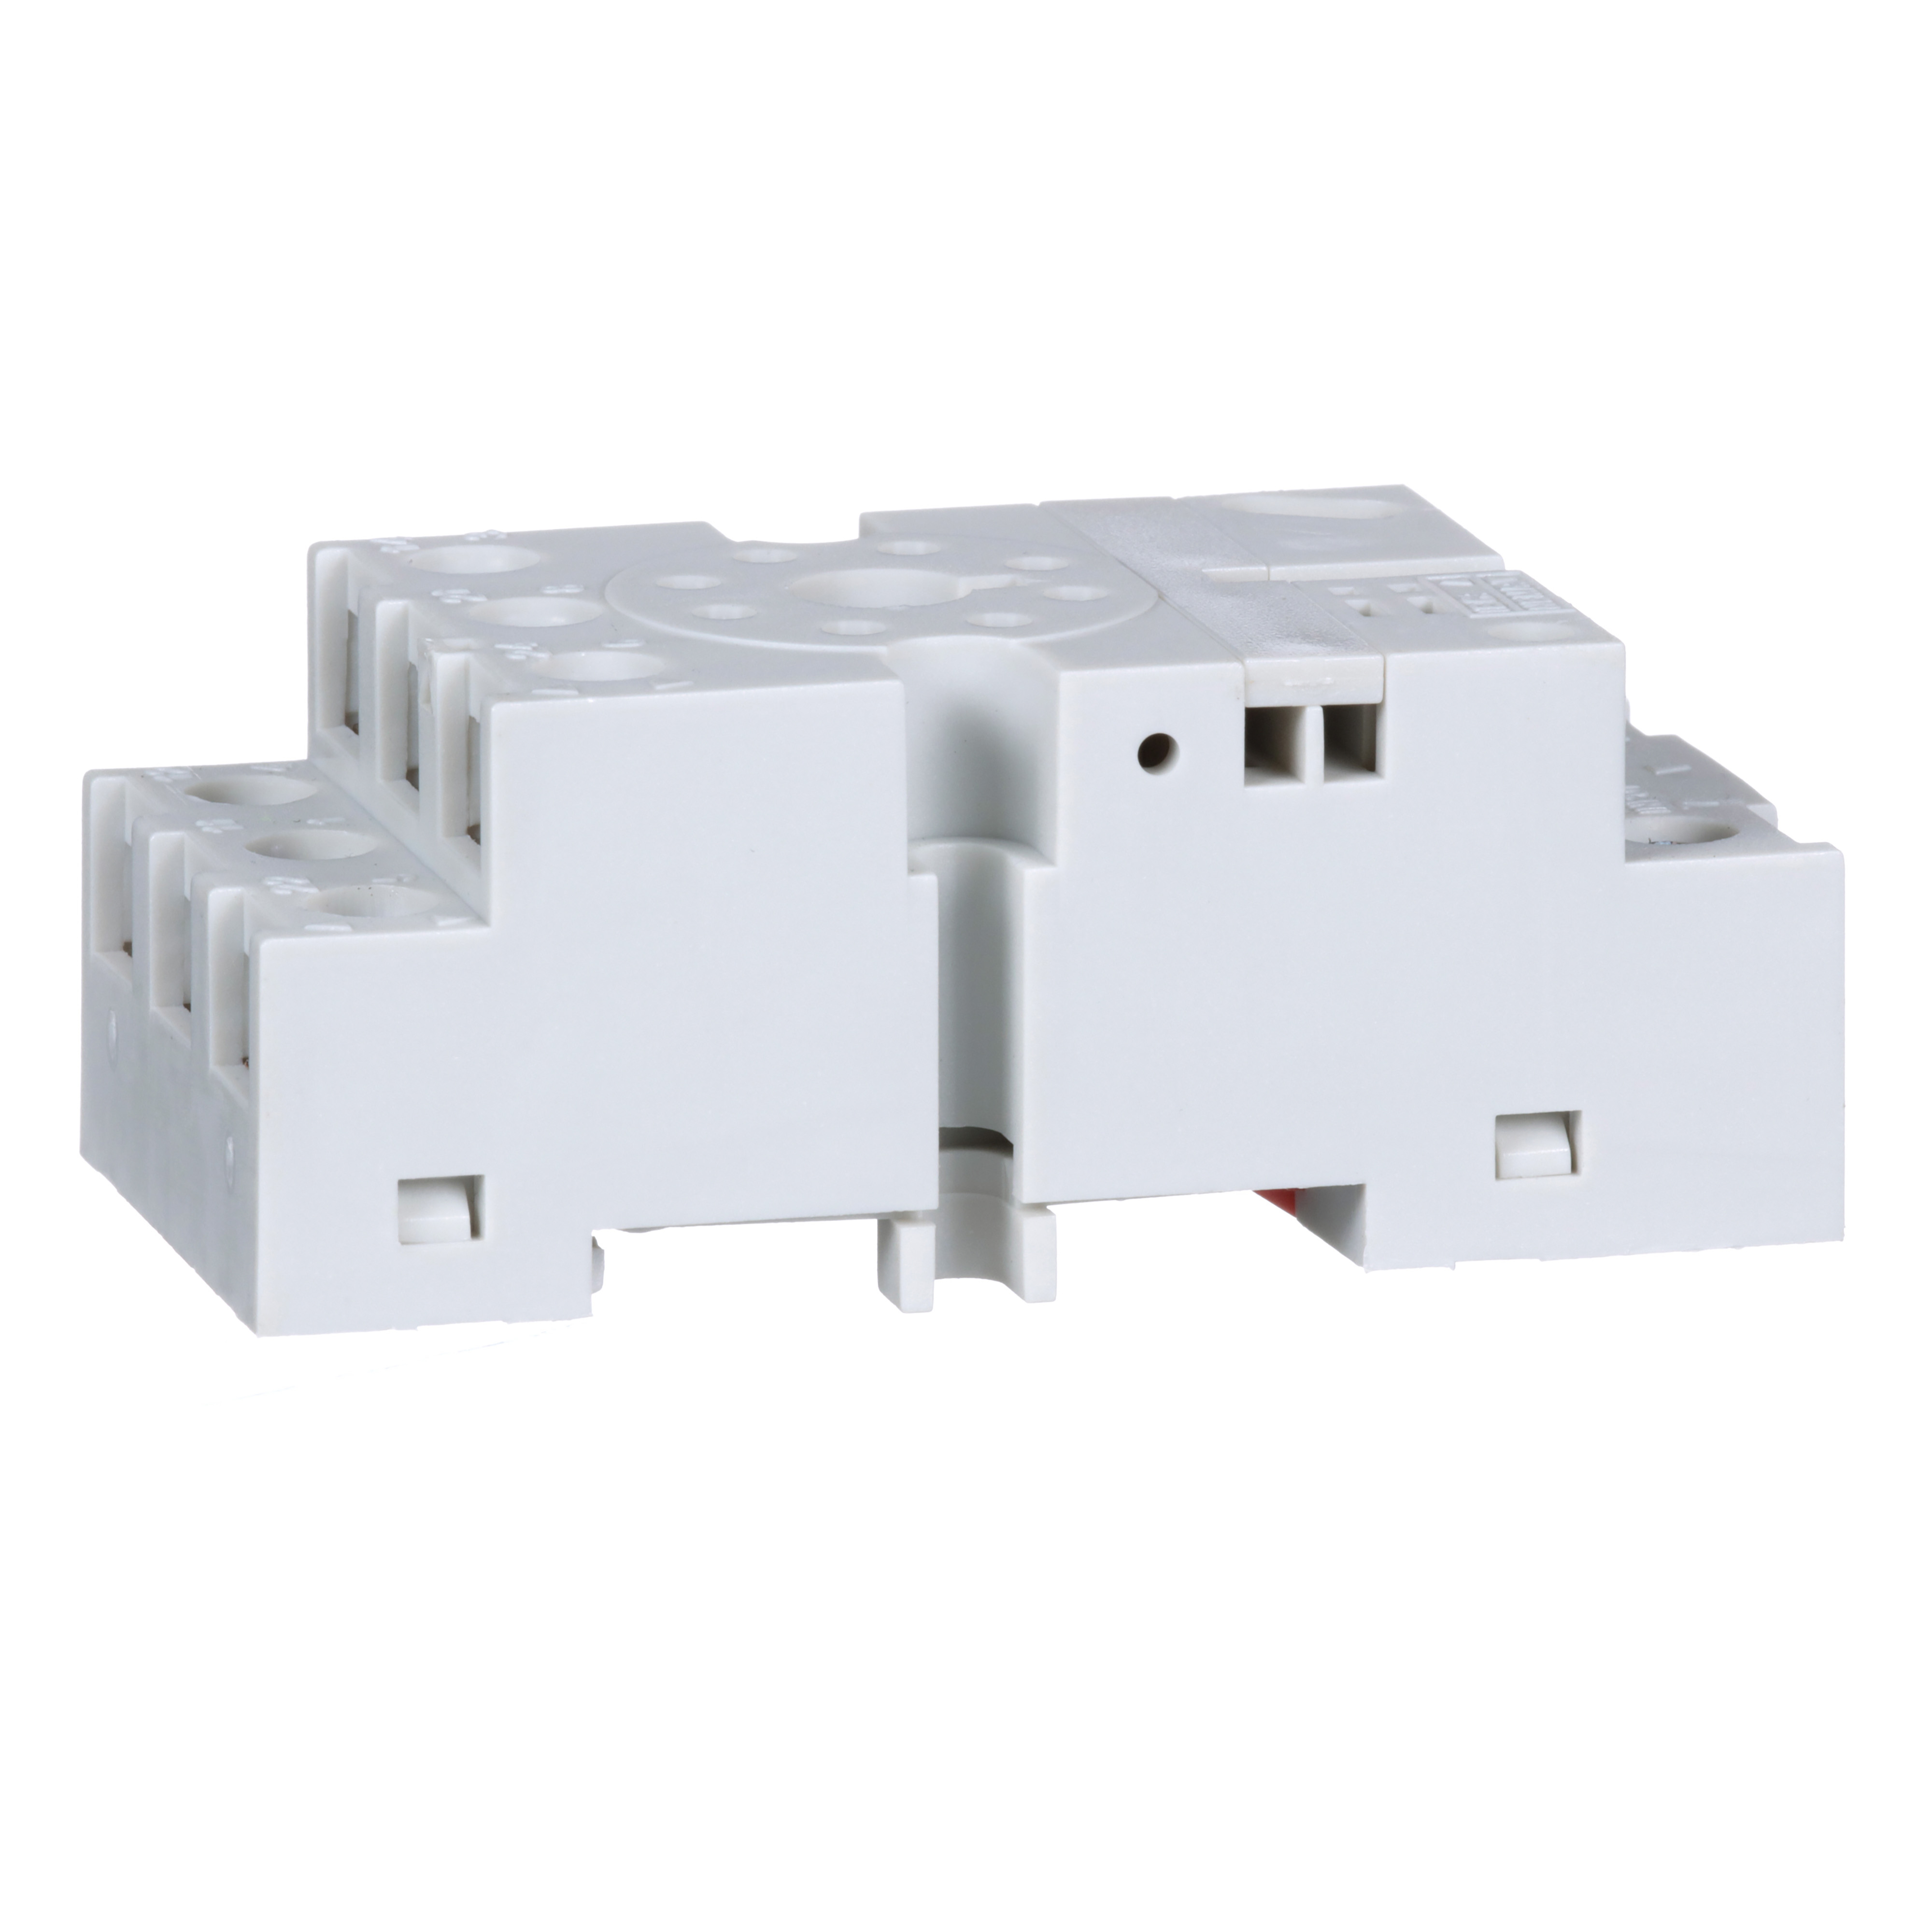 Plug in relay, Type N, relay socket, 8 tubular pin, double tier, for 8510KP relays and 9050JCK timers